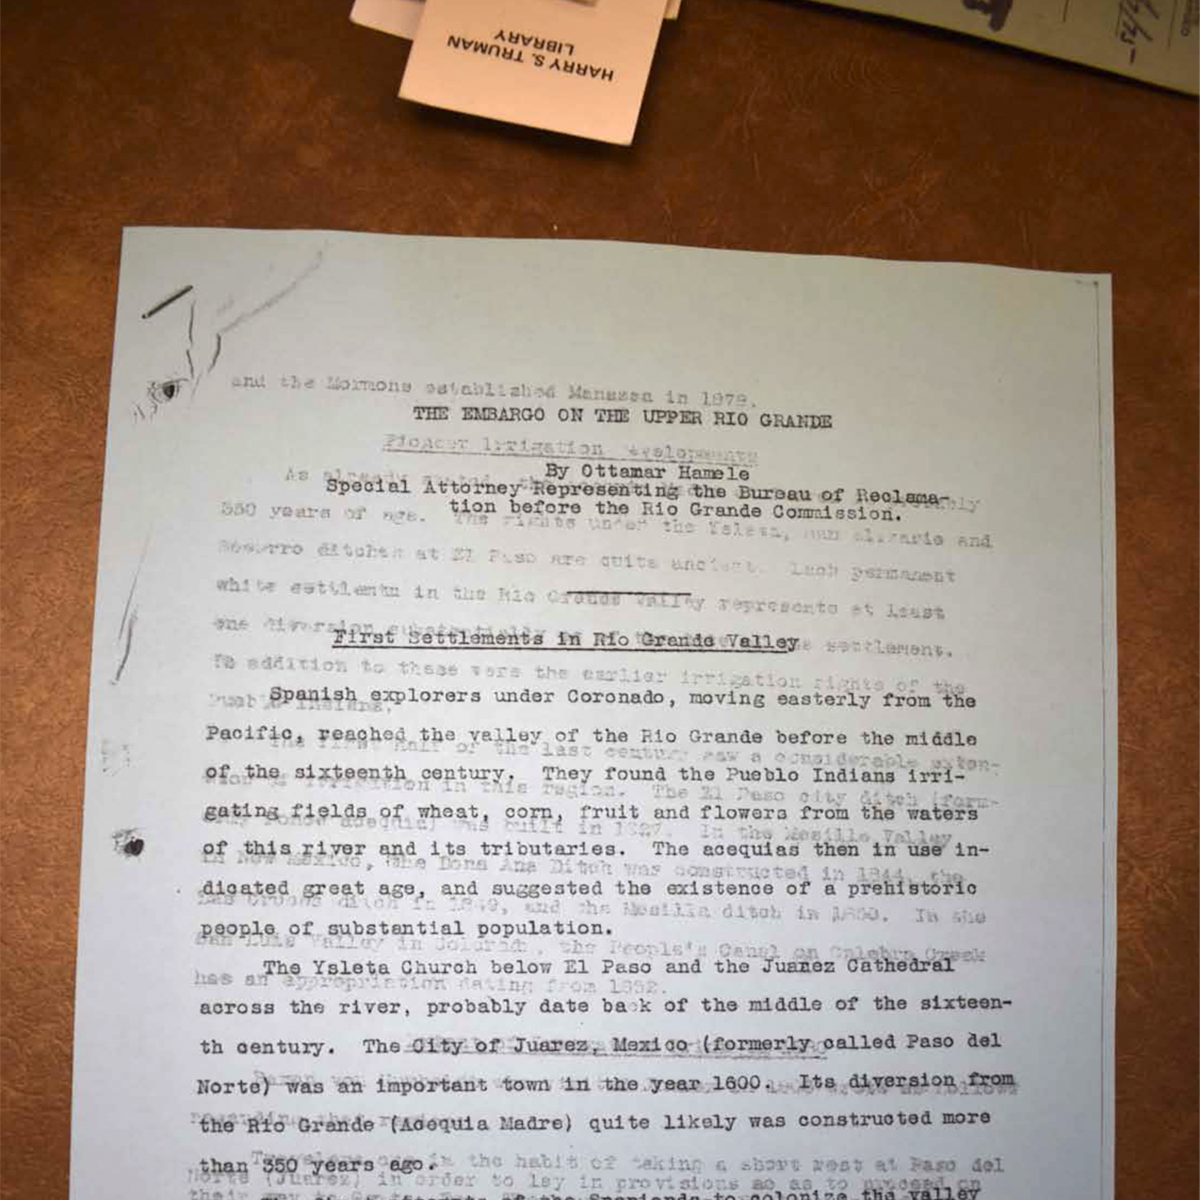 Document outlining the Embaro Upper Rio Grand